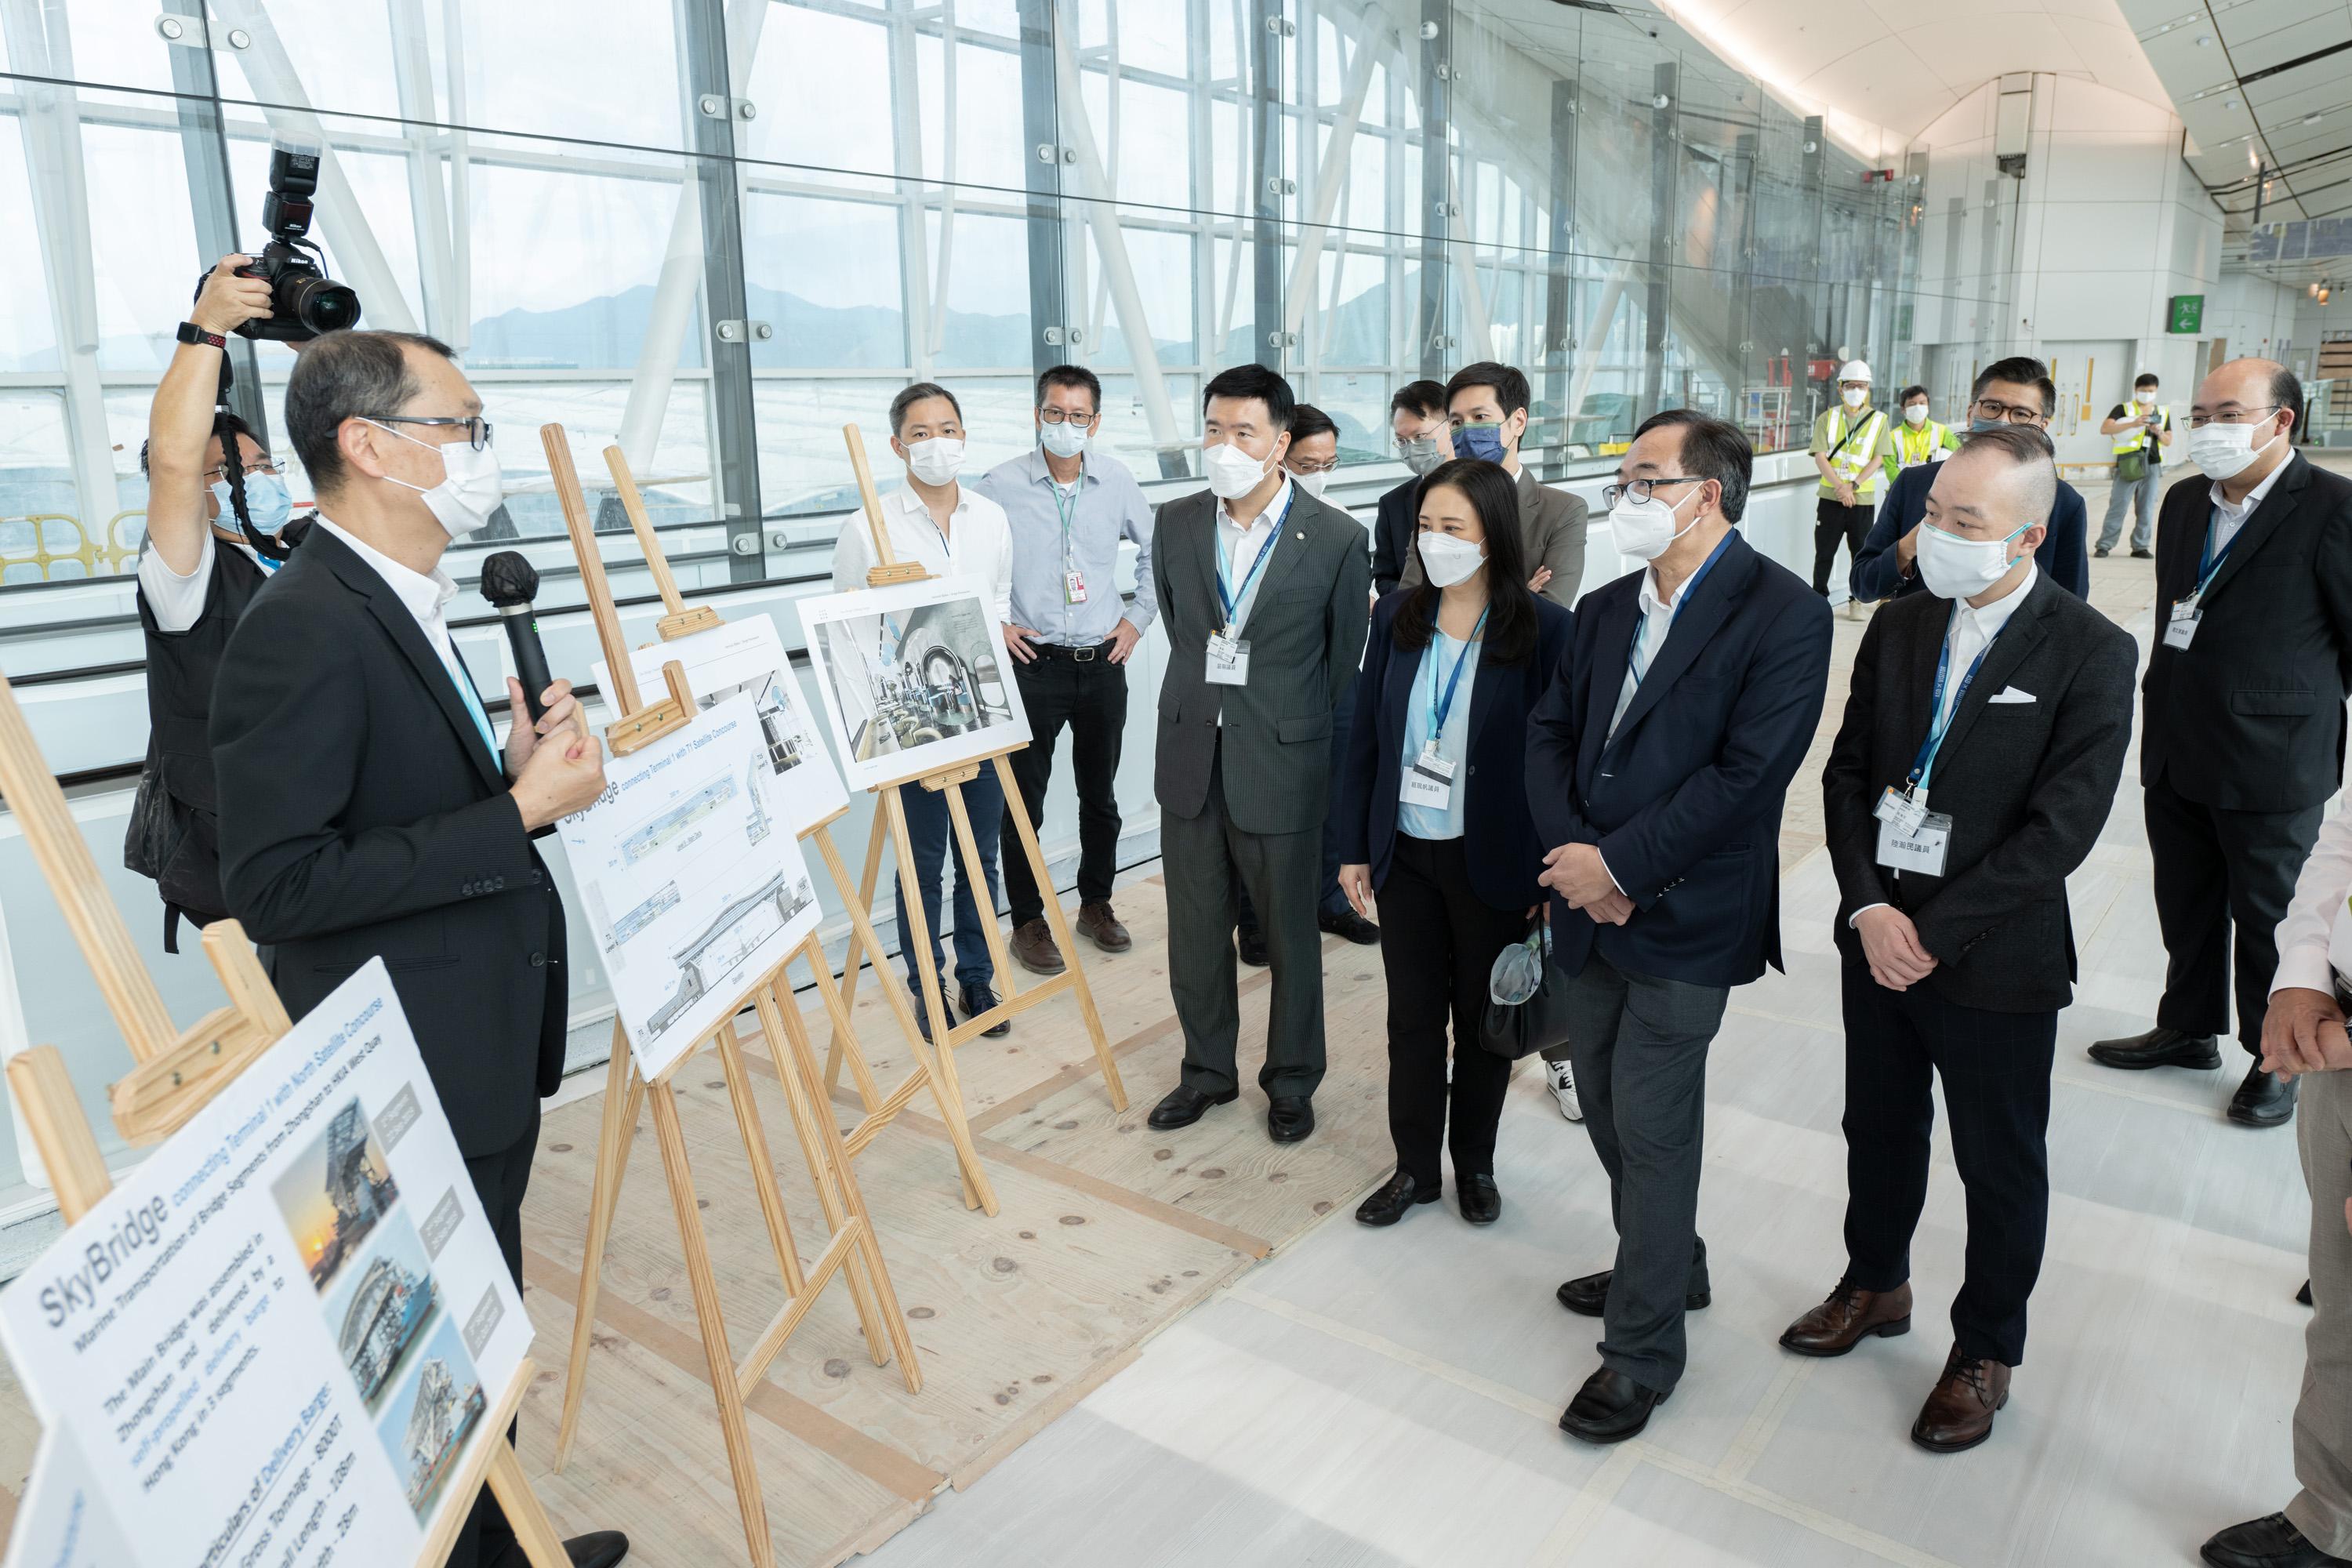 The Legislative Council (LegCo) Subcommittee on Matters Relating to the Development of Smart City visited the Hong Kong International Airport (HKIA) today (August 8). LegCo Members visited the Sky Bridge to learn about the green design of the HKIA.
